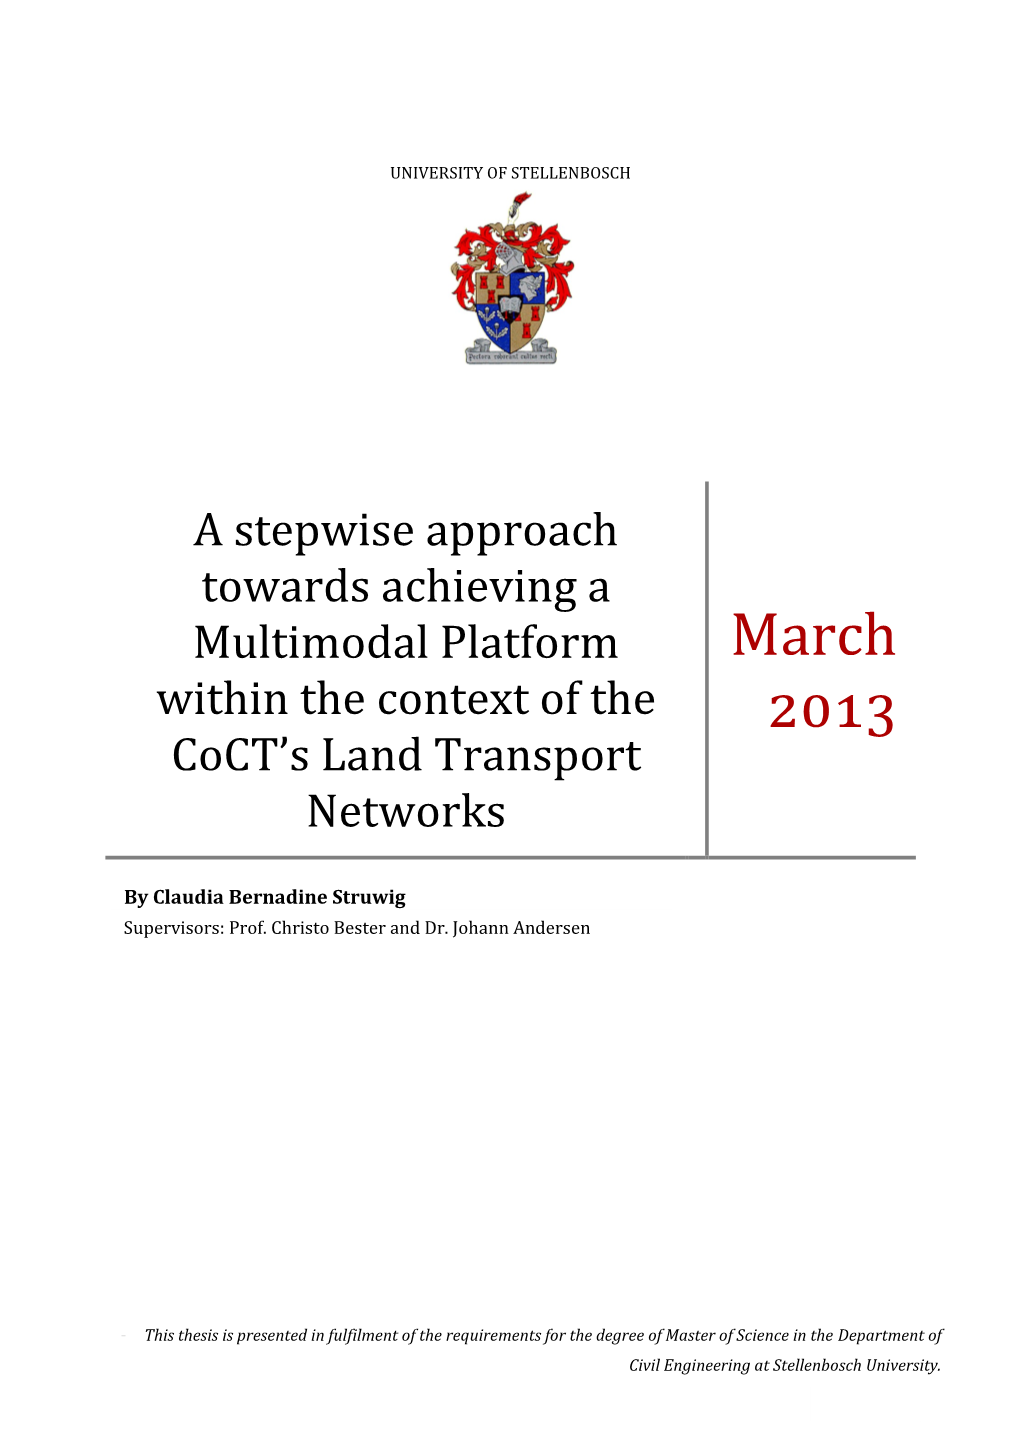 A Stepwise Approach Towards Achieving a Multimodal Platform Within the Context of the Coct’S Land Transport Networks